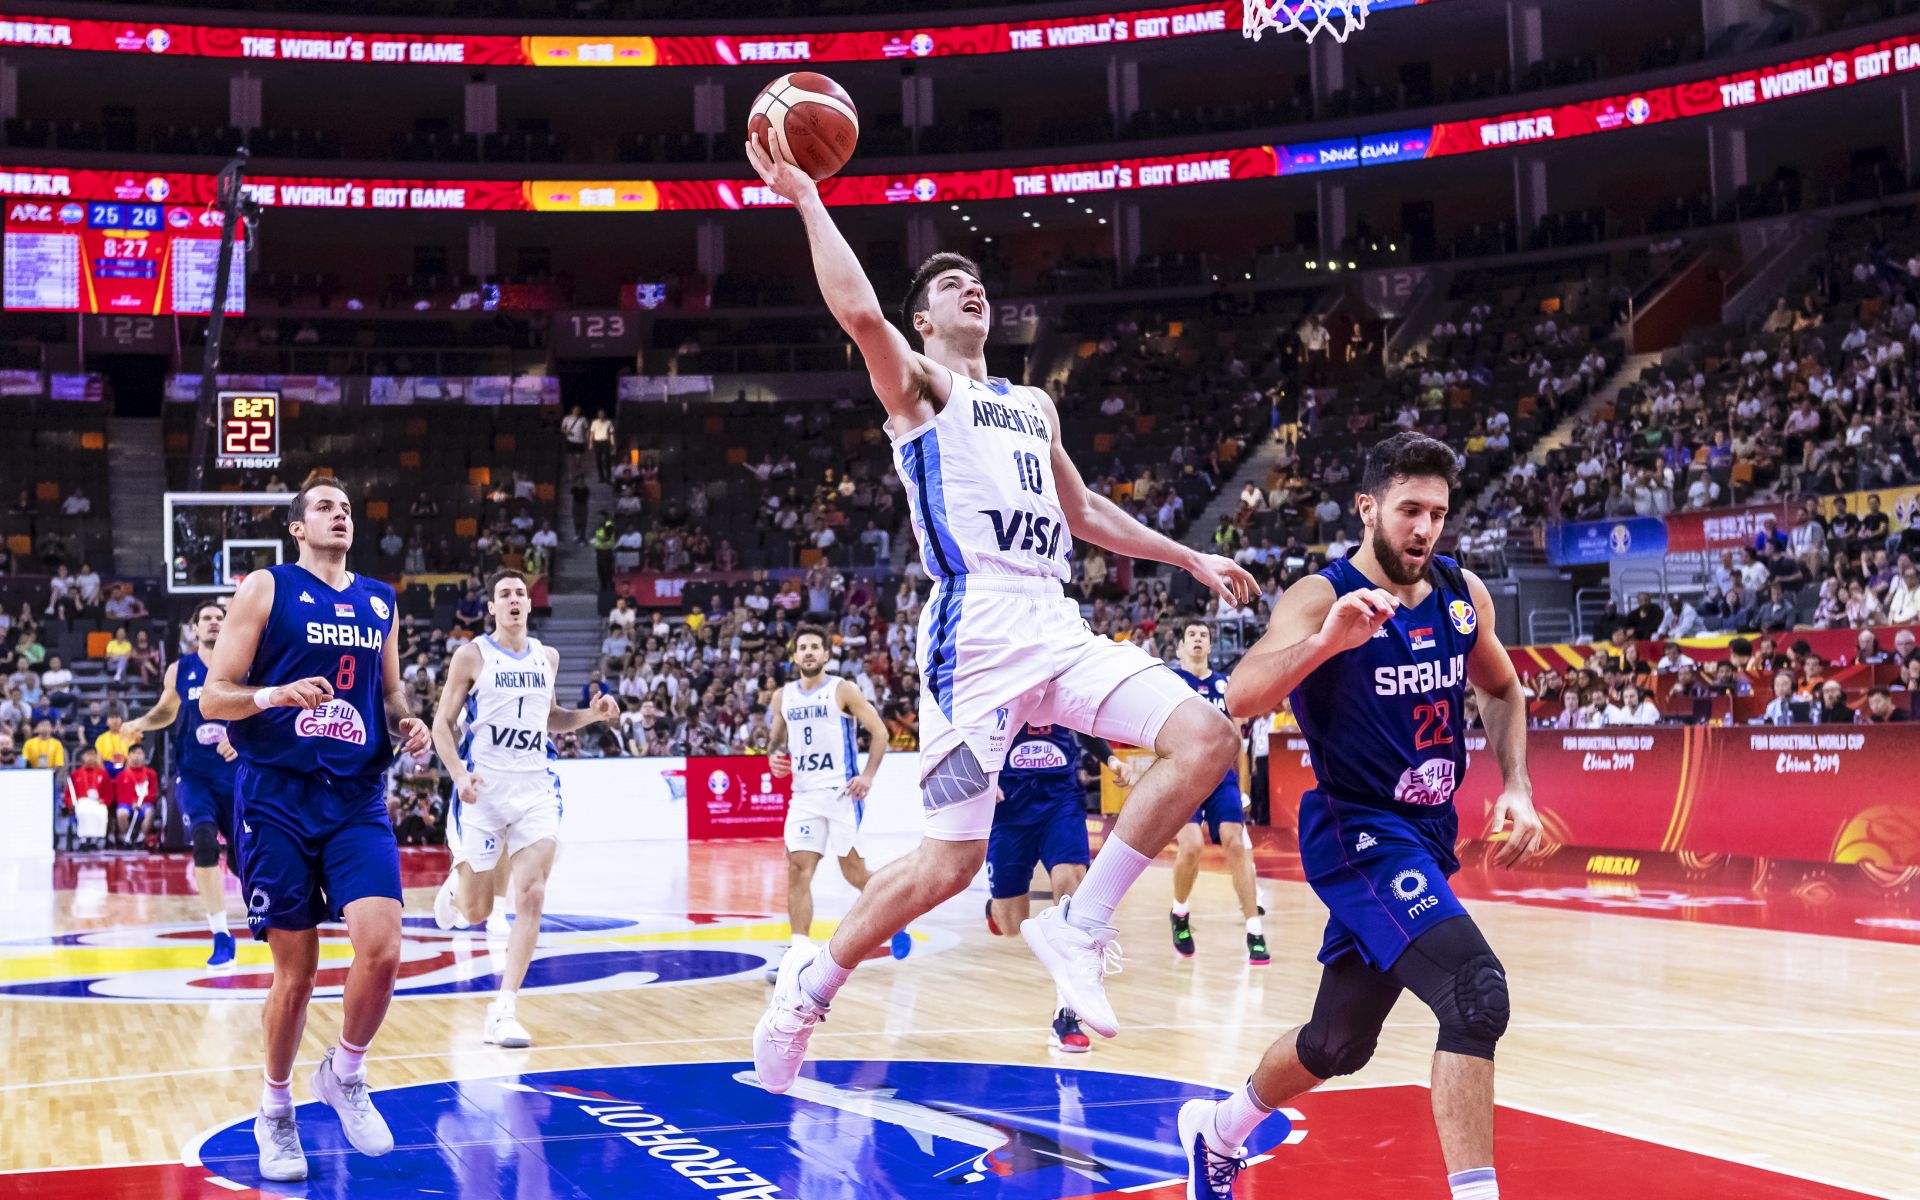 epa07832181 Maximo Fjellerup (C) of Argentina in action against Serbian players Nemanja Bjelica (L) and Vasilije Micic (R) during the FIBA Basketball World Cup 2019 quarter final match between Argentina and Serbia in Dongguan, China, 10 September 2019.  EPA/ALEX PLAVEVSKI